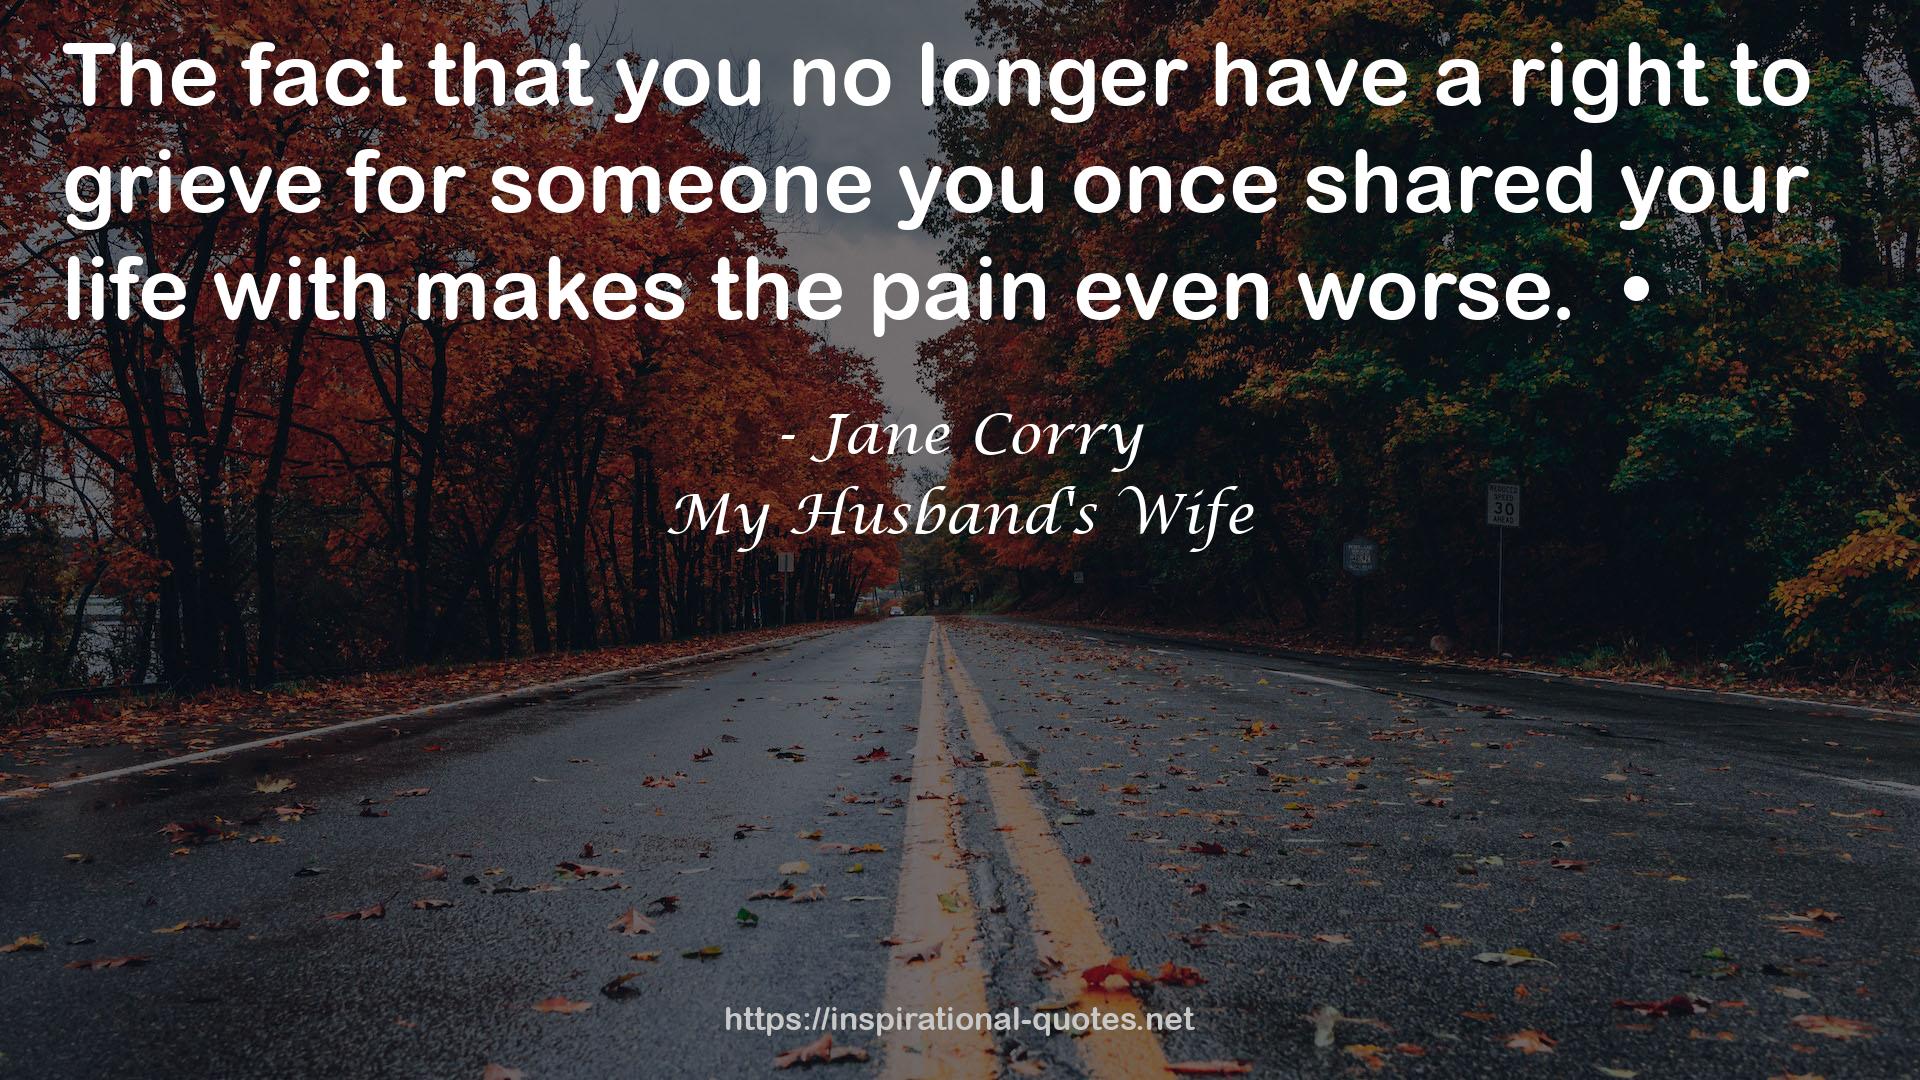 My Husband's Wife QUOTES